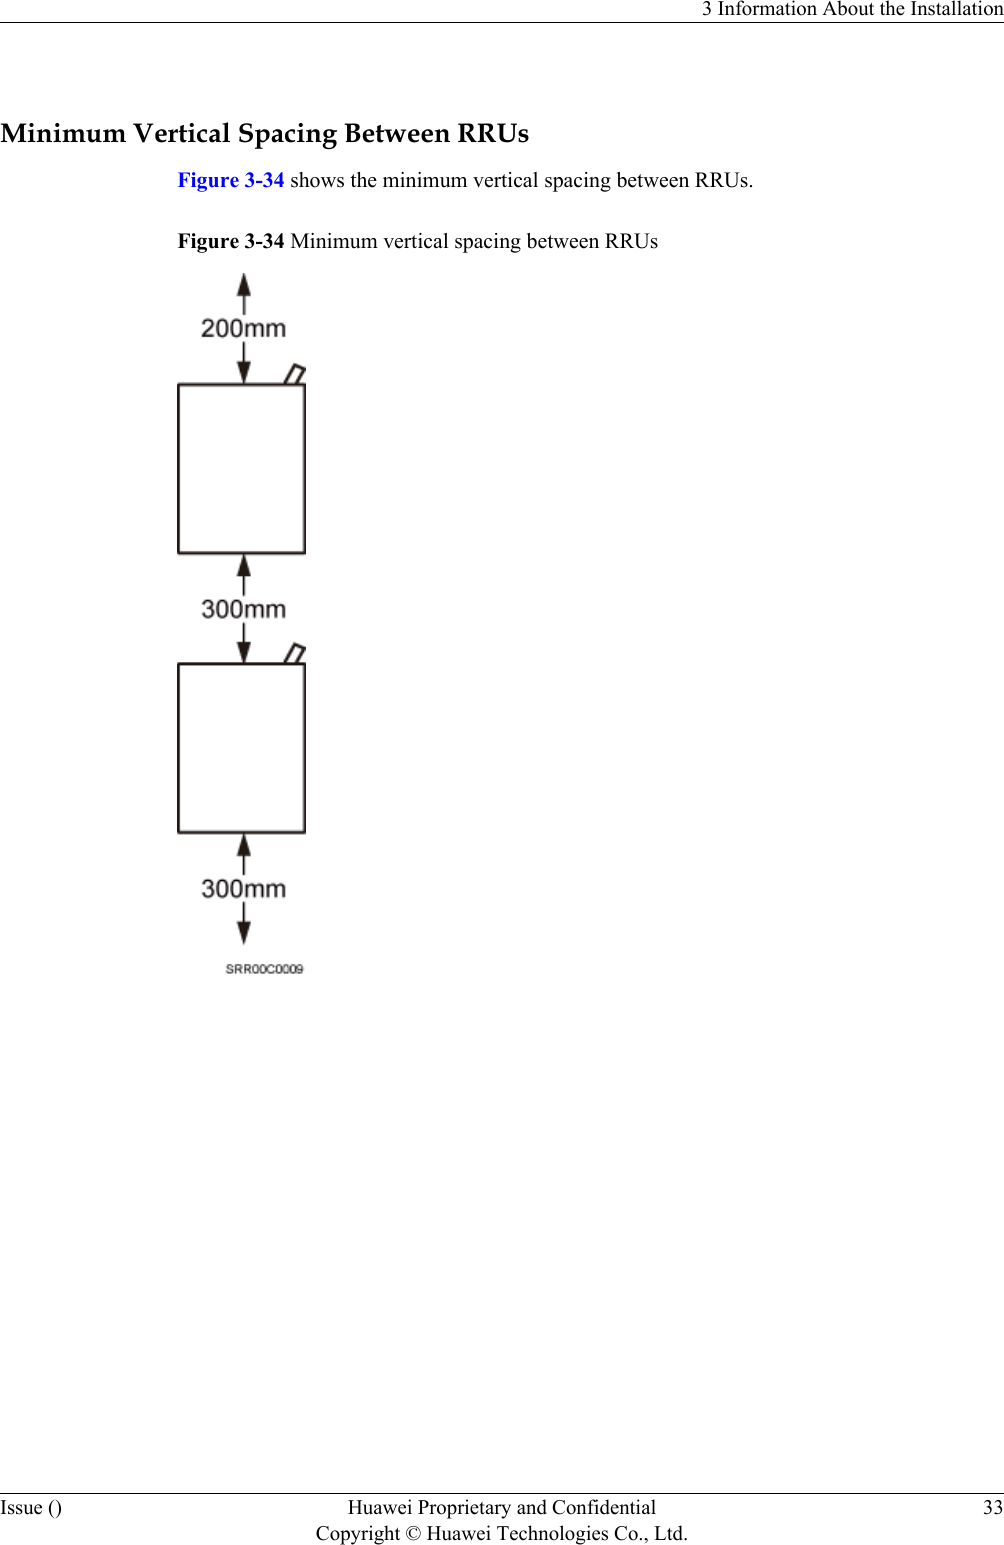  Minimum Vertical Spacing Between RRUsFigure 3-34 shows the minimum vertical spacing between RRUs.Figure 3-34 Minimum vertical spacing between RRUs3 Information About the InstallationIssue () Huawei Proprietary and ConfidentialCopyright © Huawei Technologies Co., Ltd.33